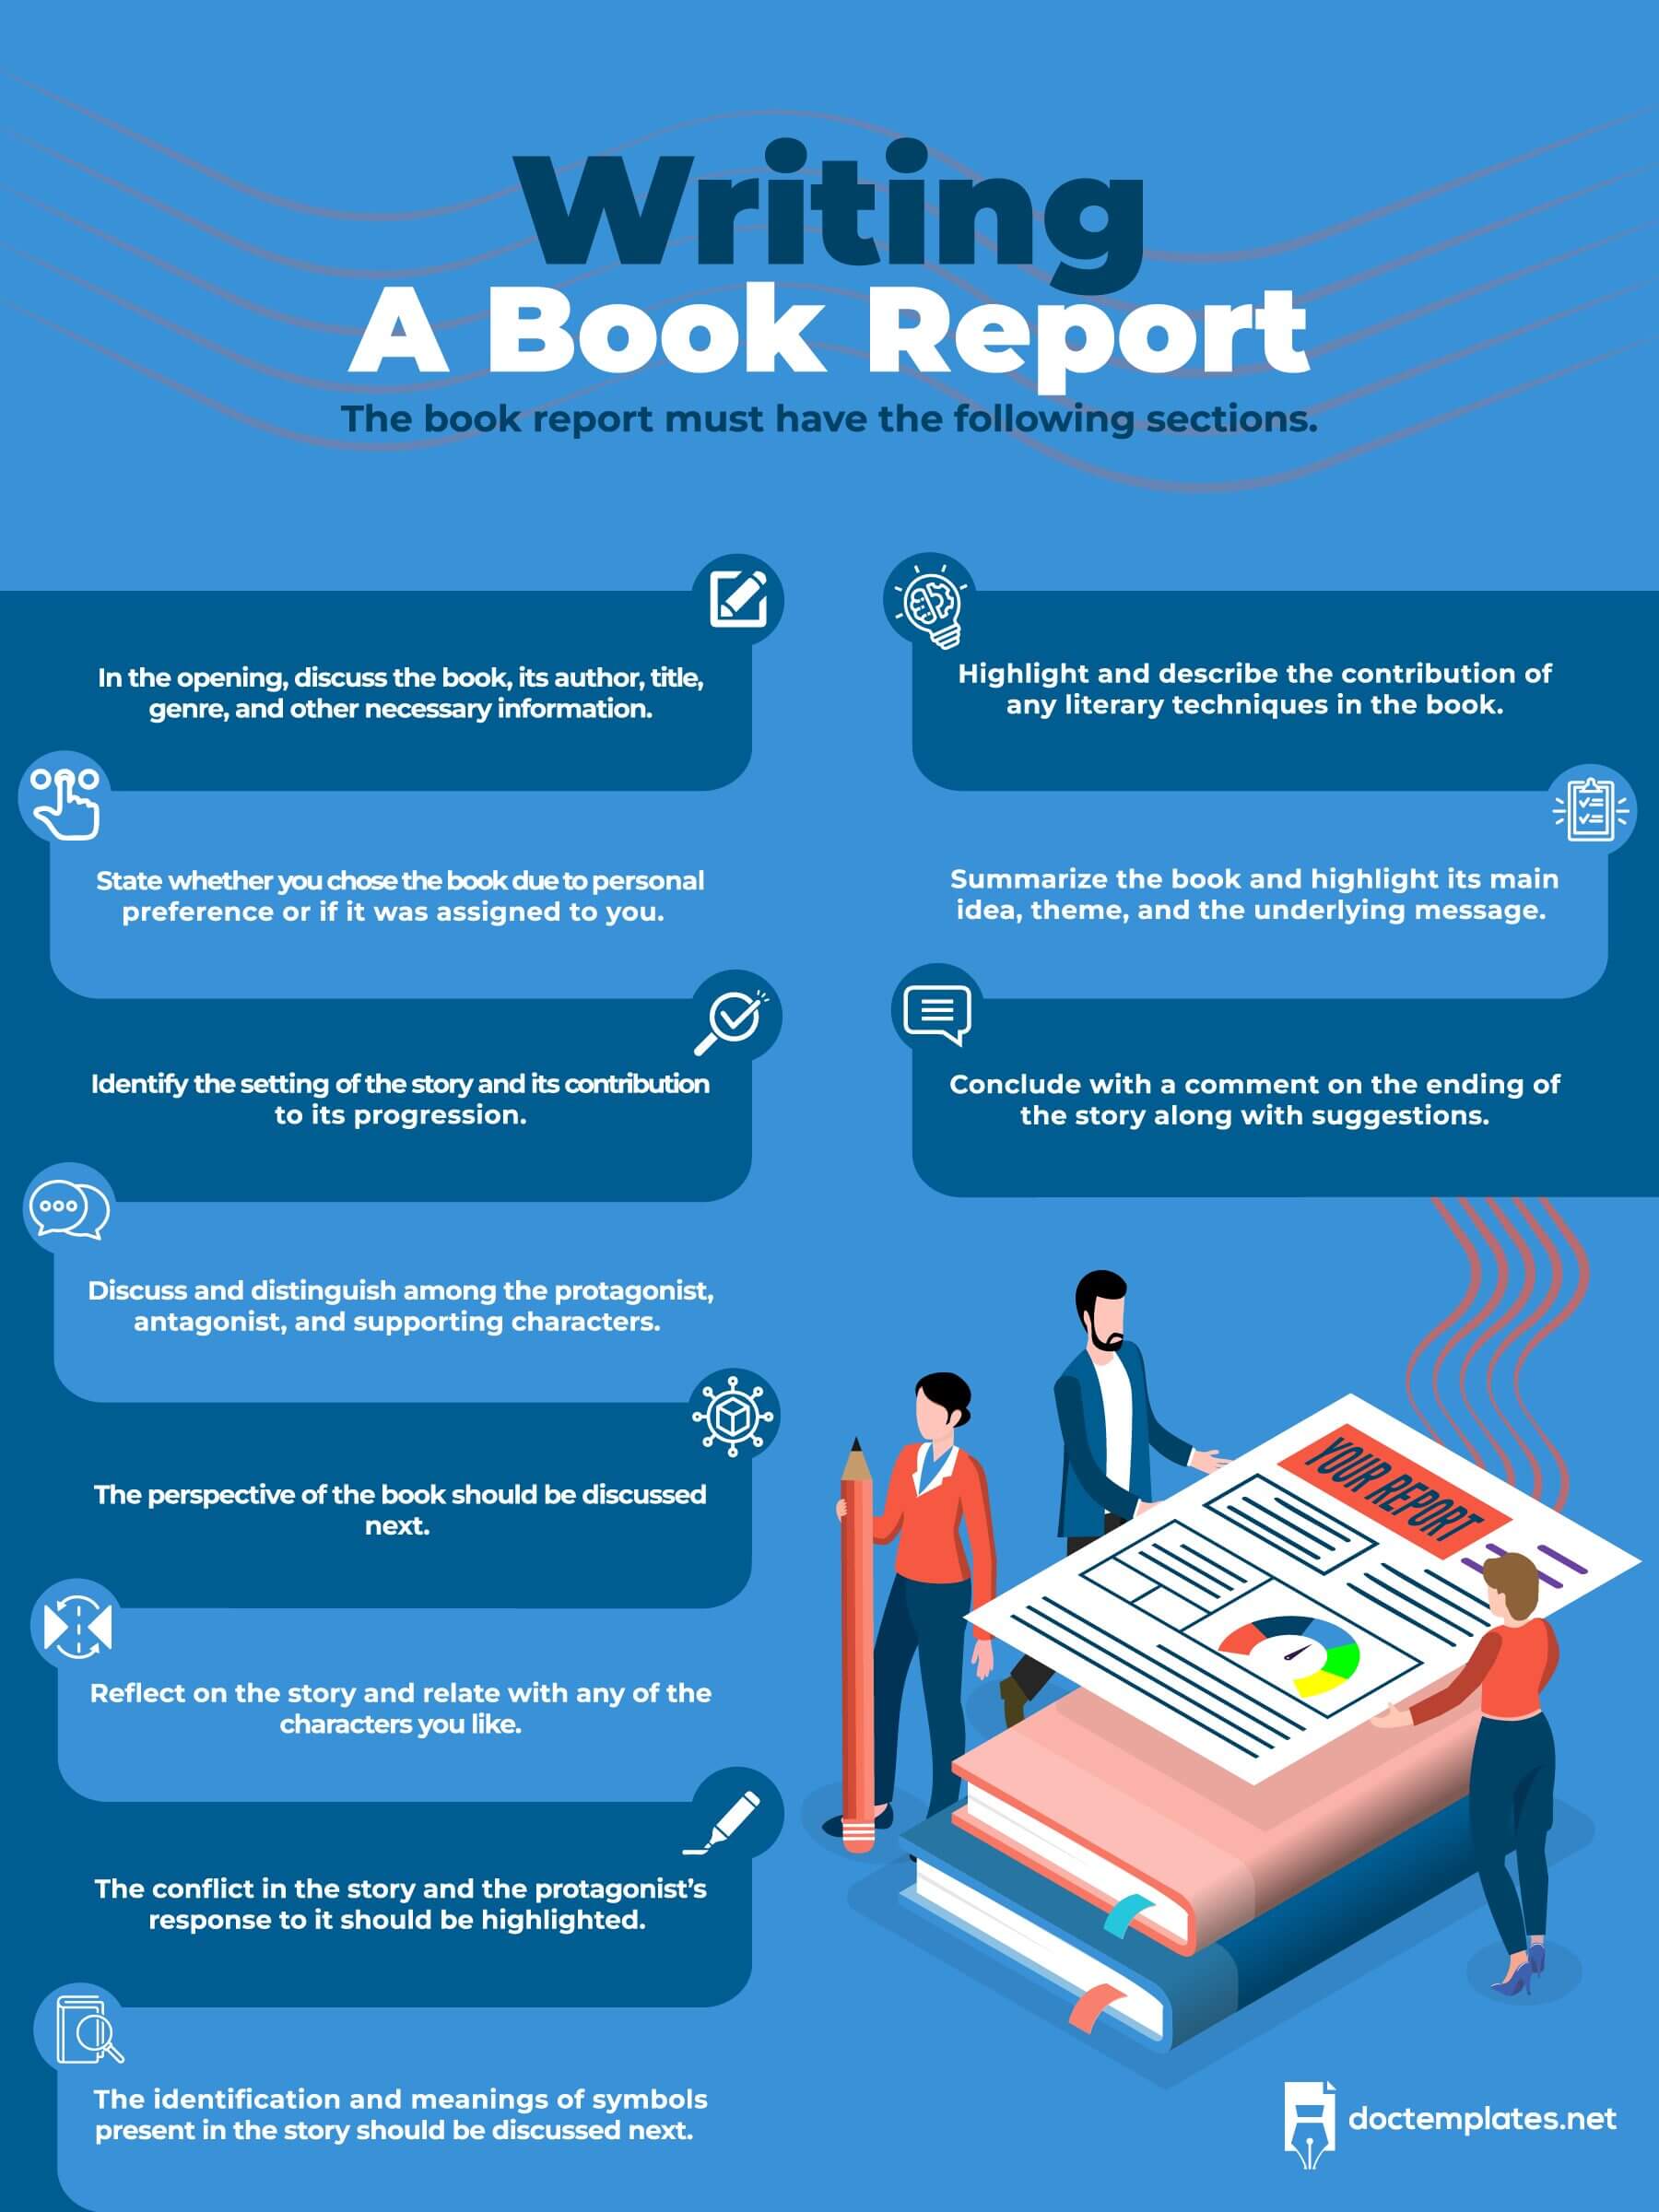 This infographic is about the must have sections while writing a book report.